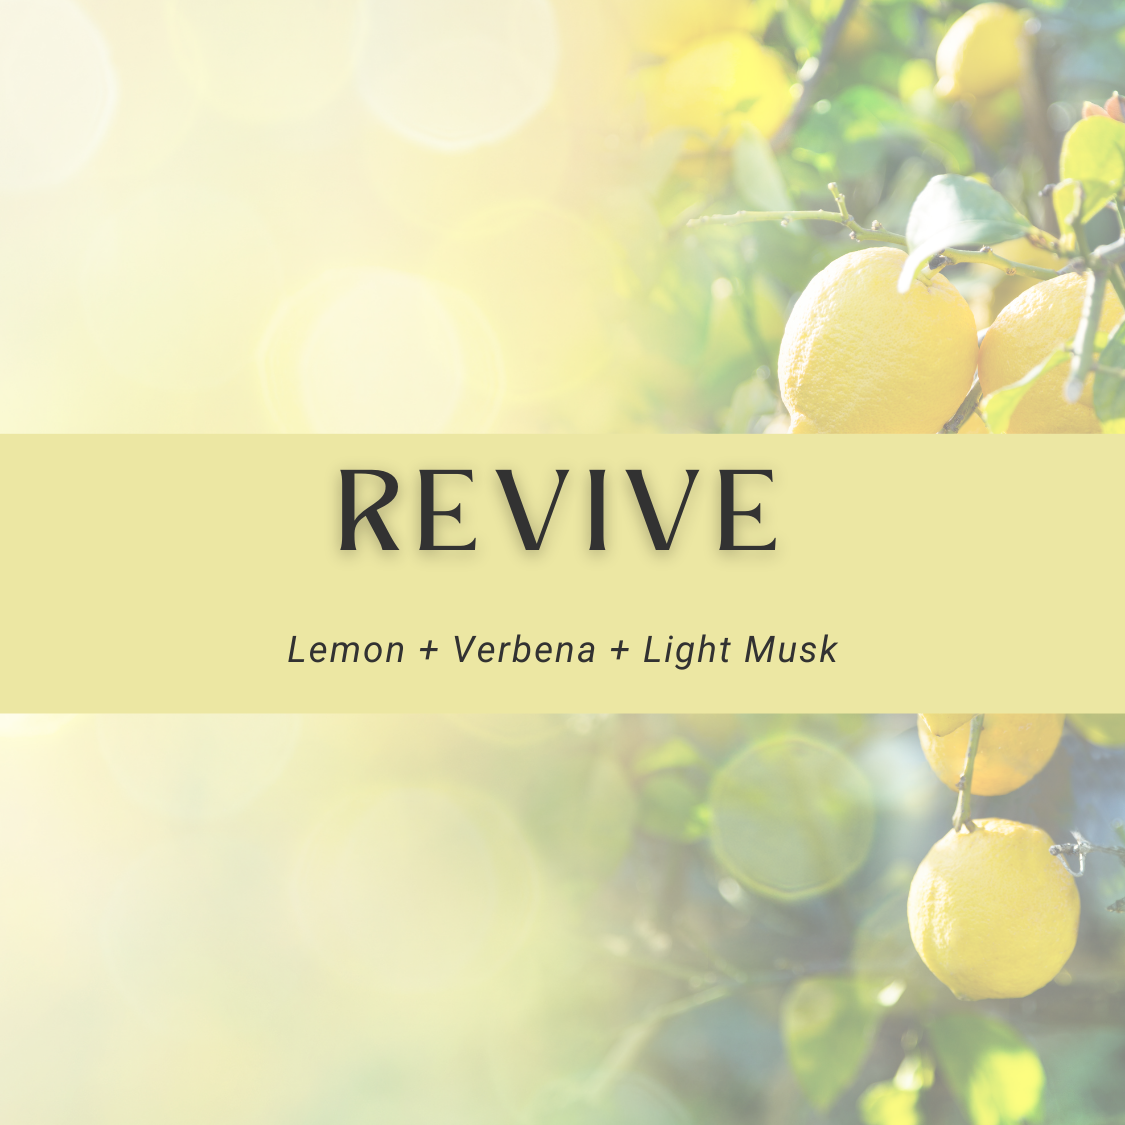 Revive Soy Candle